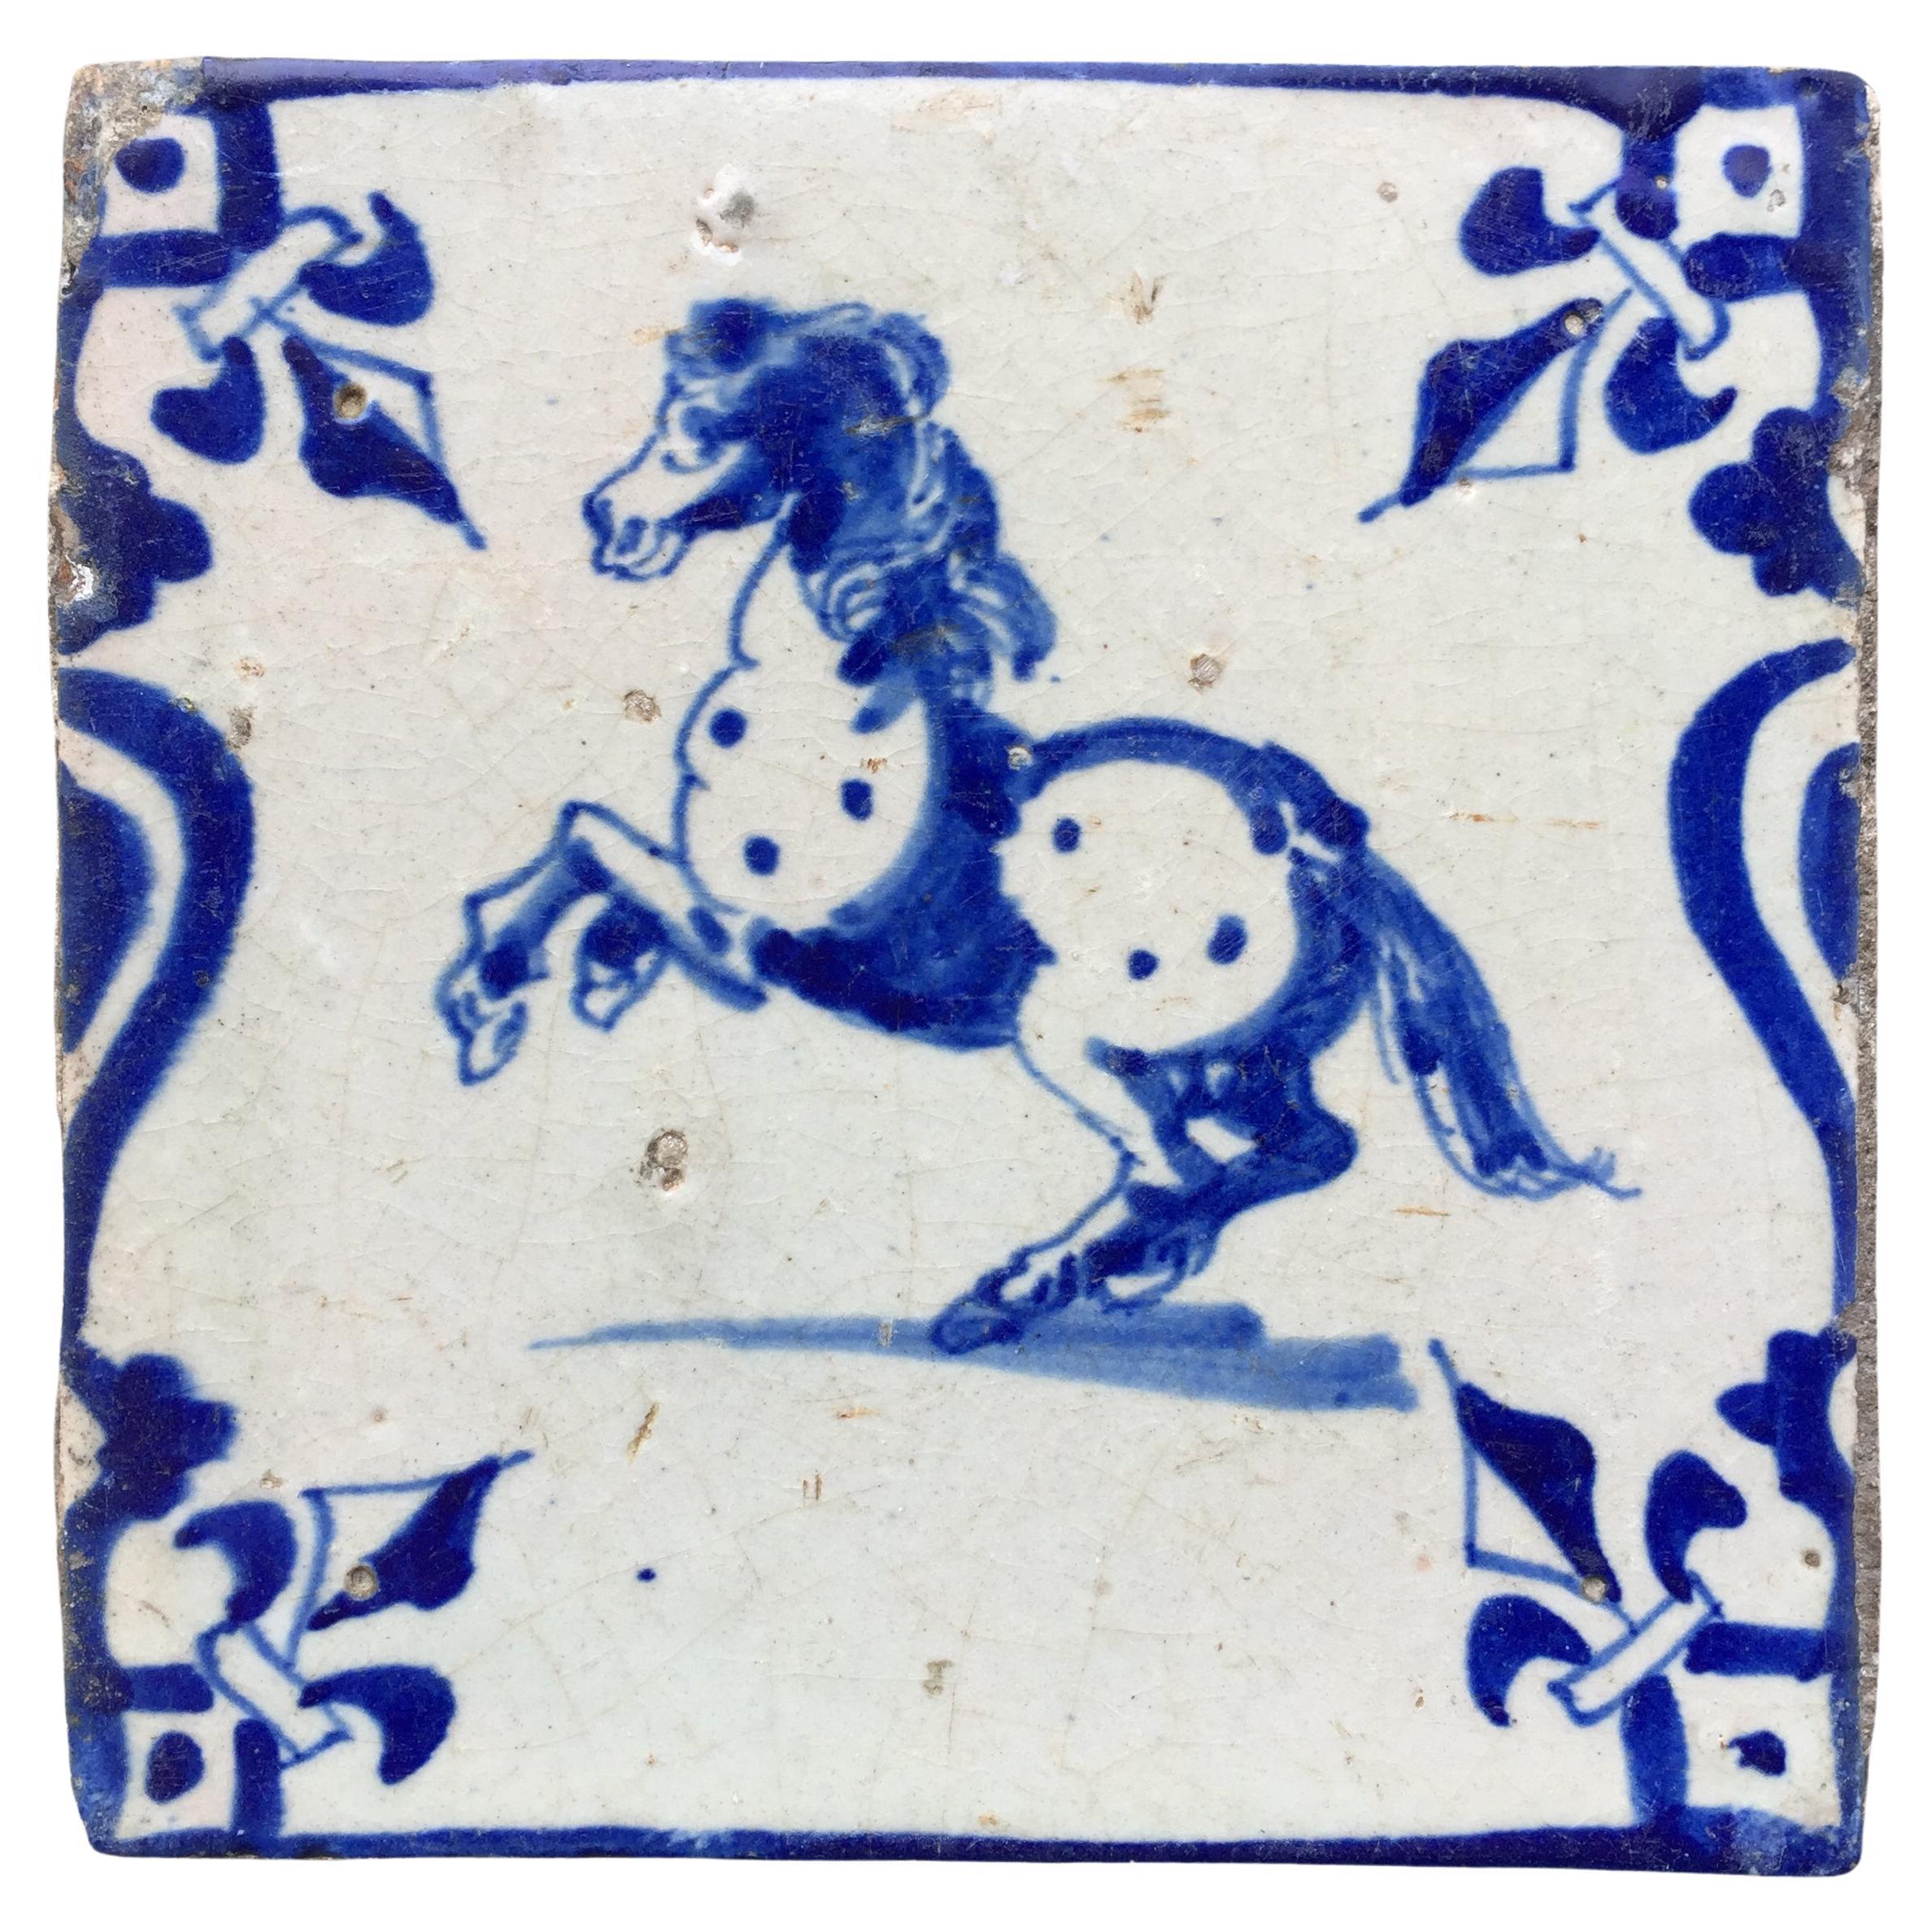 Blue and White Dutch Delft Tile with Grey Horse, Mid 17th Century